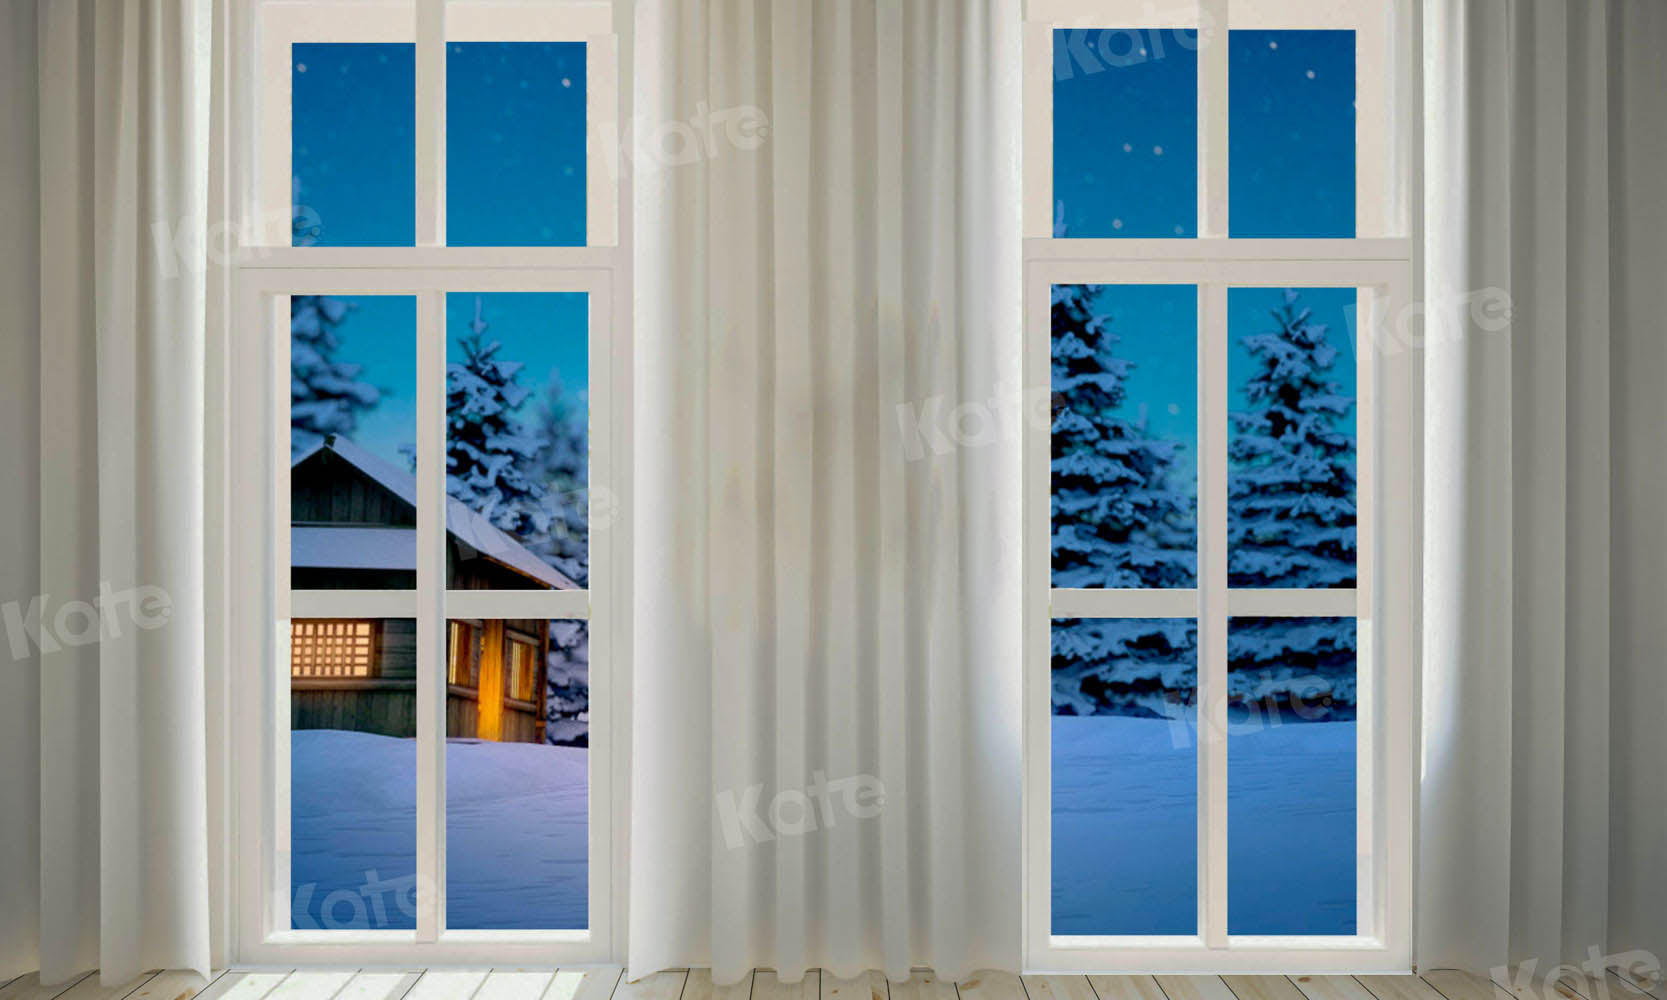 Kate Winter Night Snow Background Window for Photography Designed by Chain Photography